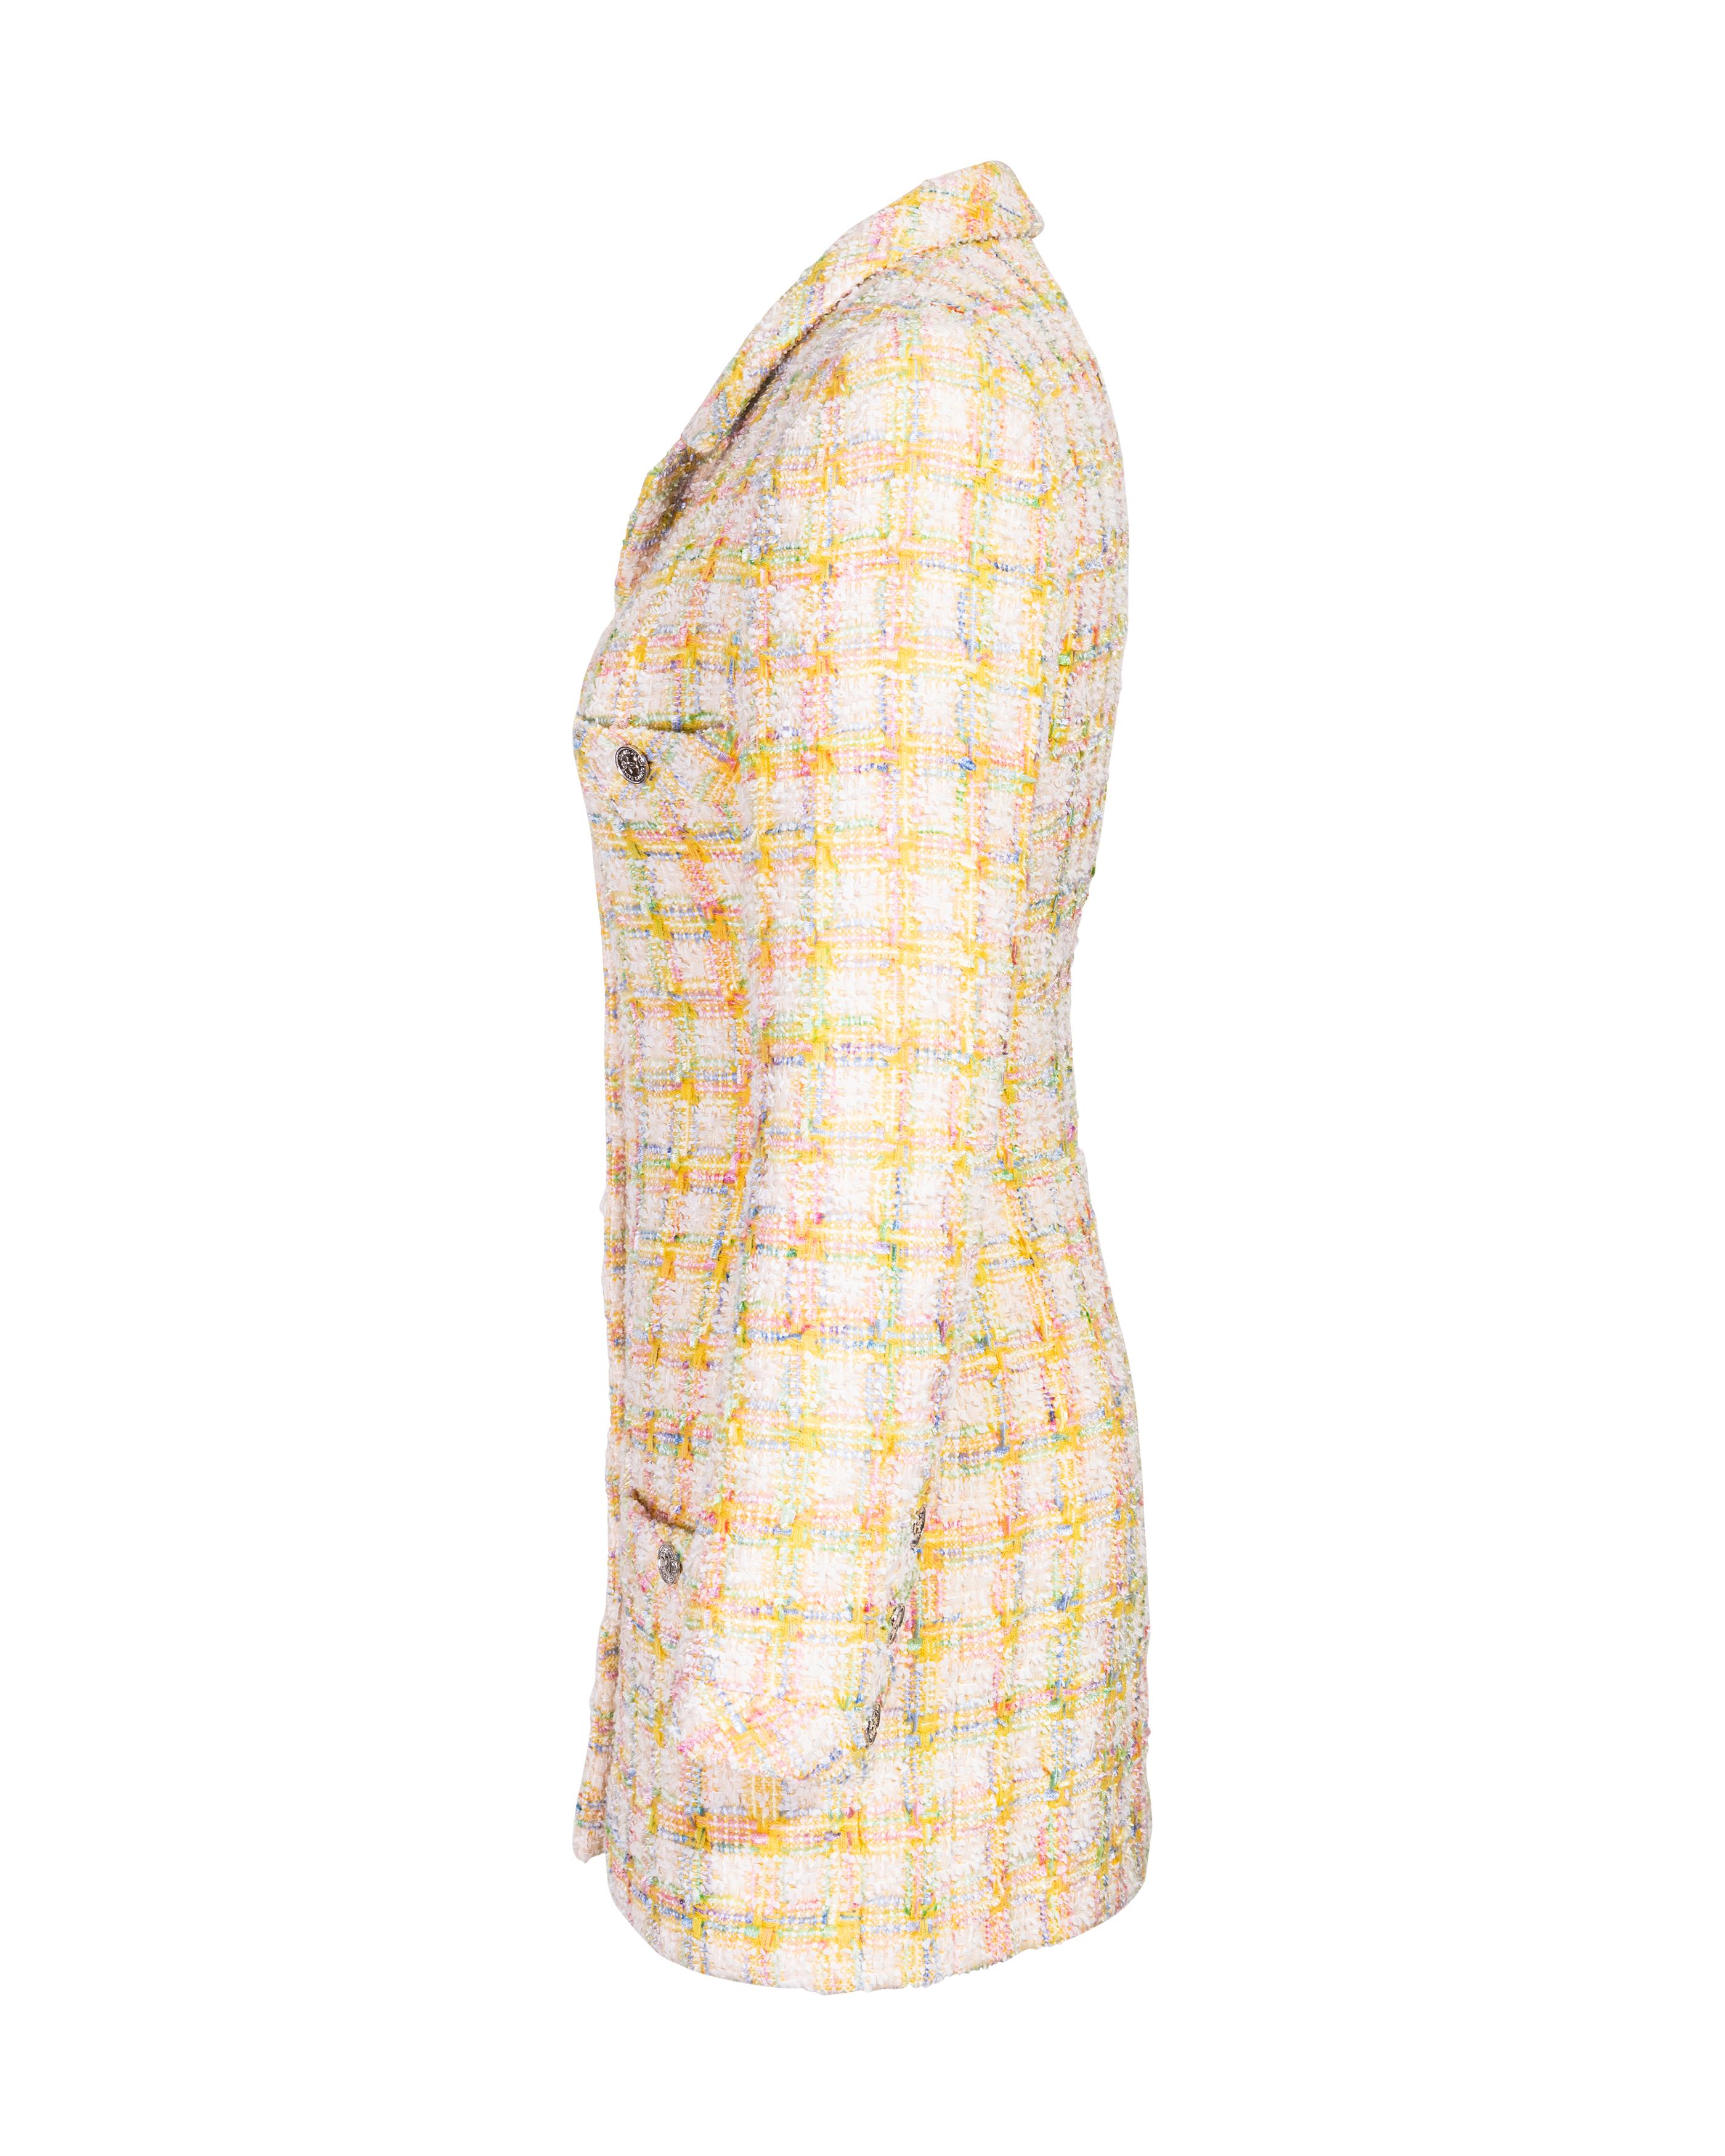 S/S 1996 Chanel by Karl Lagerfeld Pastel Yellow Tweed Mini Blazer Dress In Good Condition In North Hollywood, CA